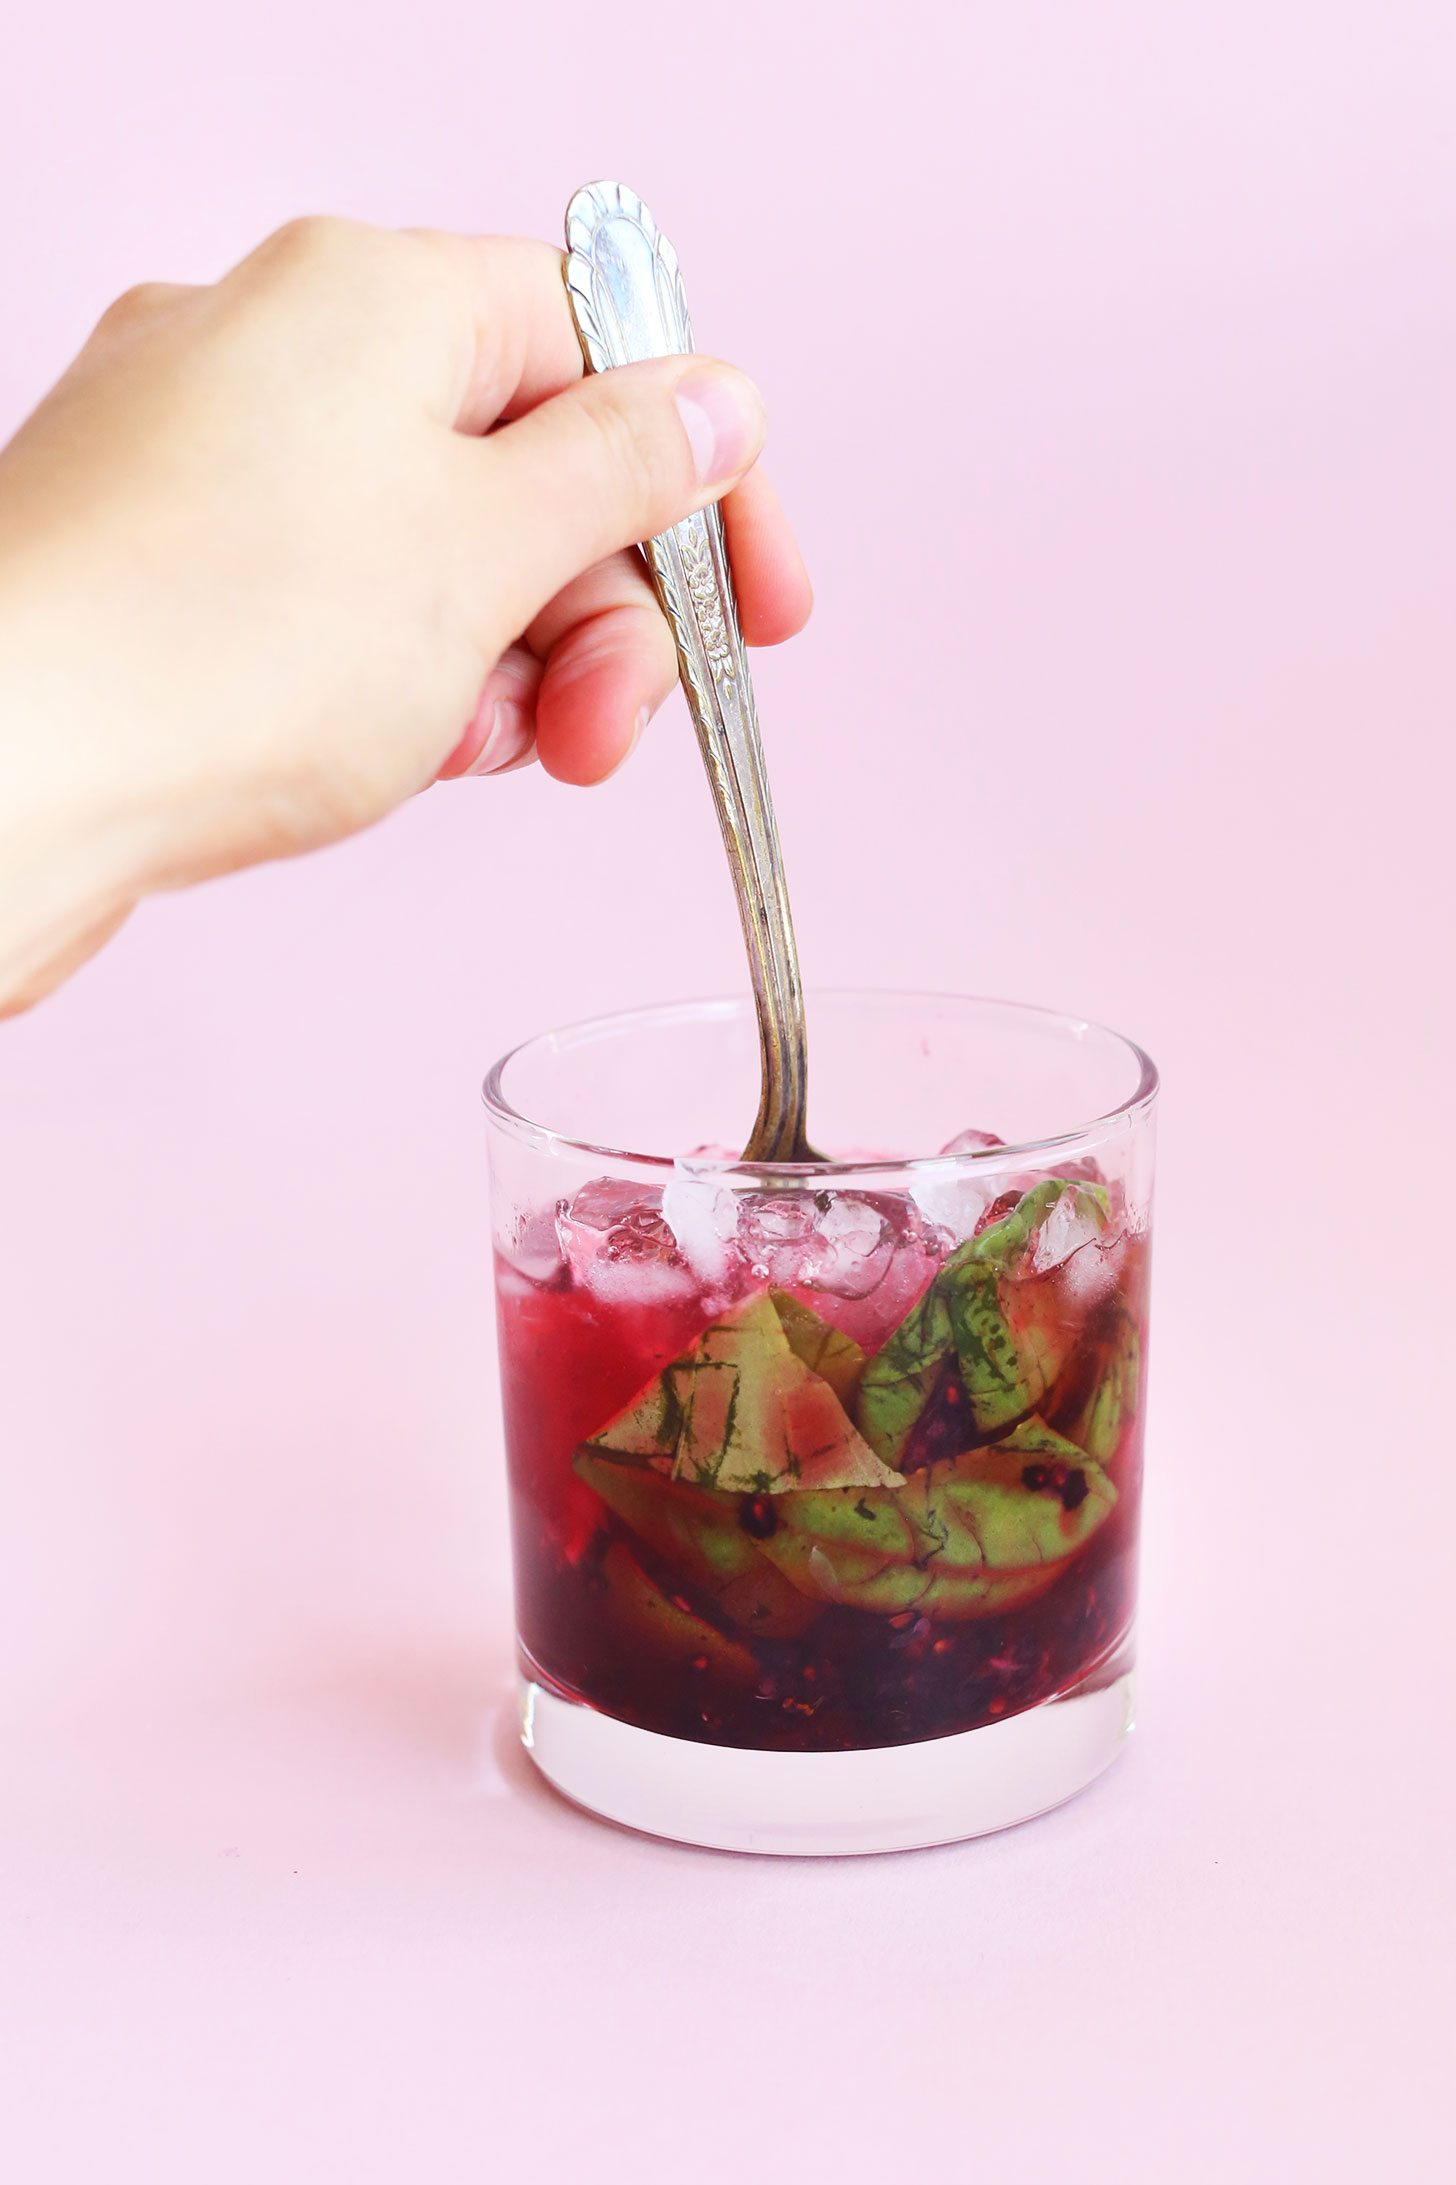 Stirring a Blackberry Basil Mojito for a refreshing summer drink